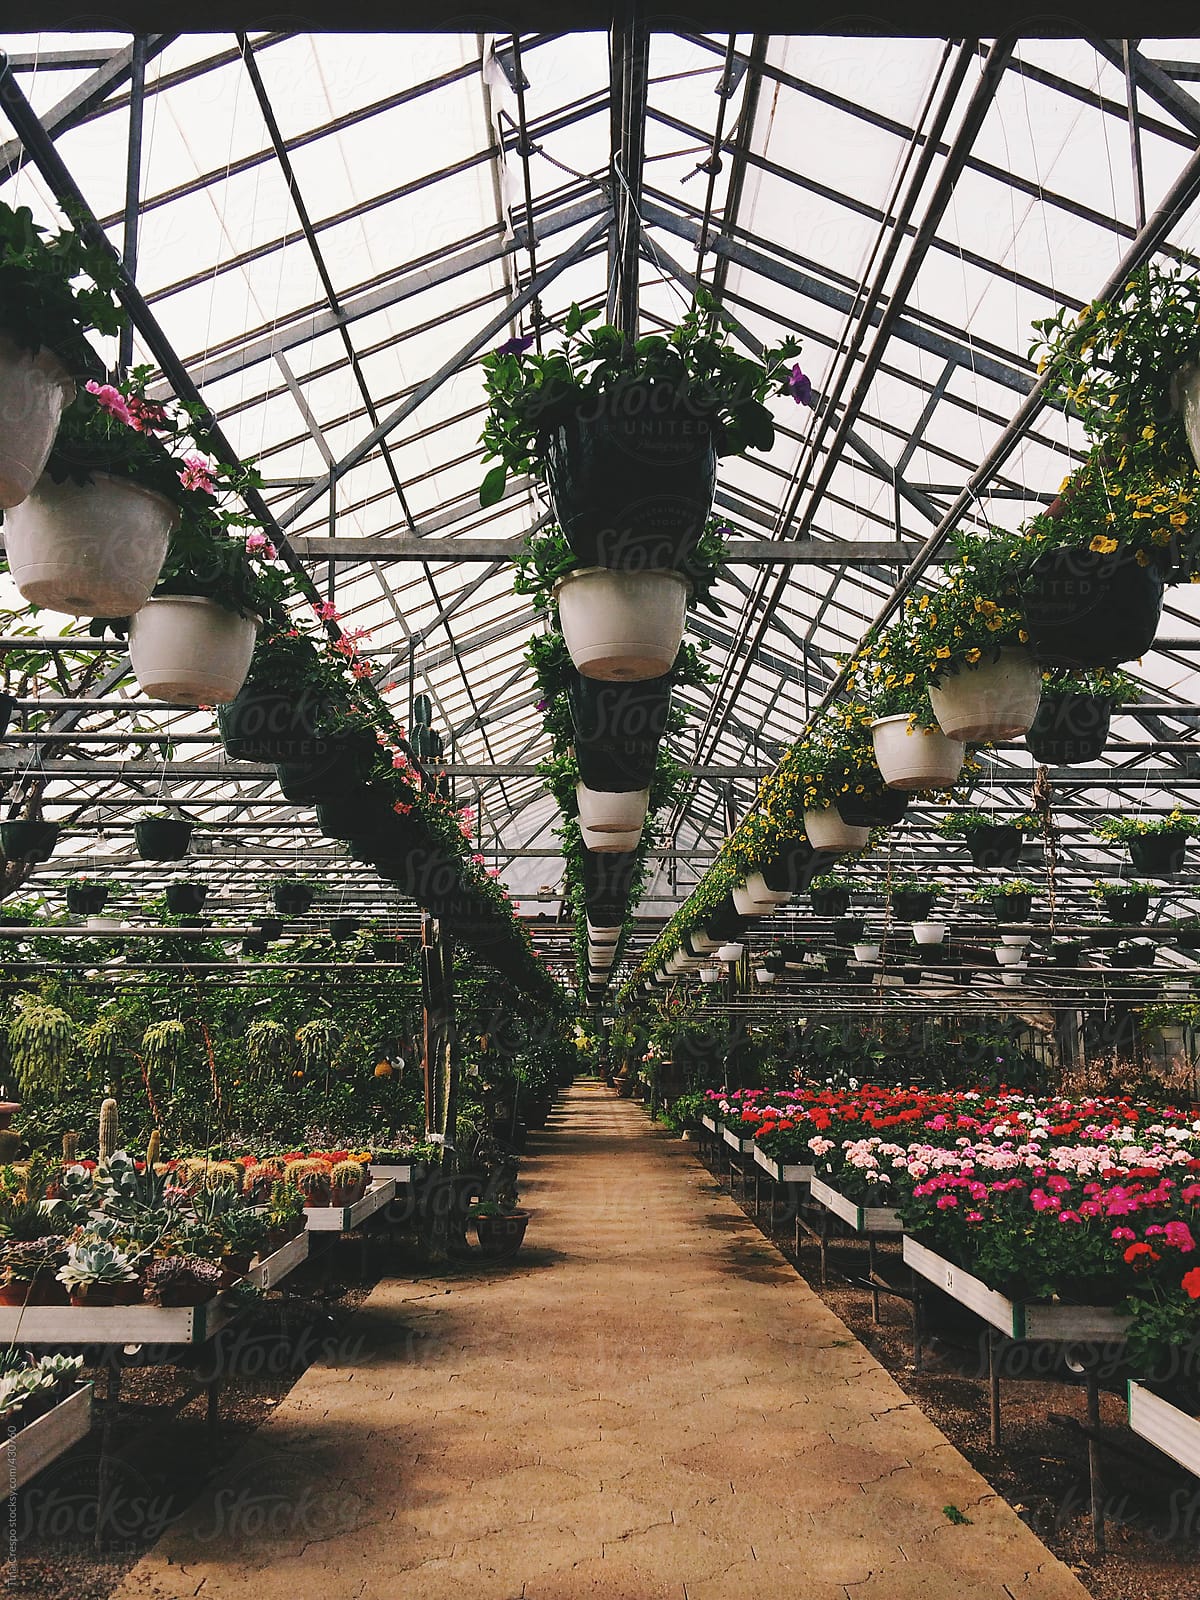 Looking down a greenhouse aisle